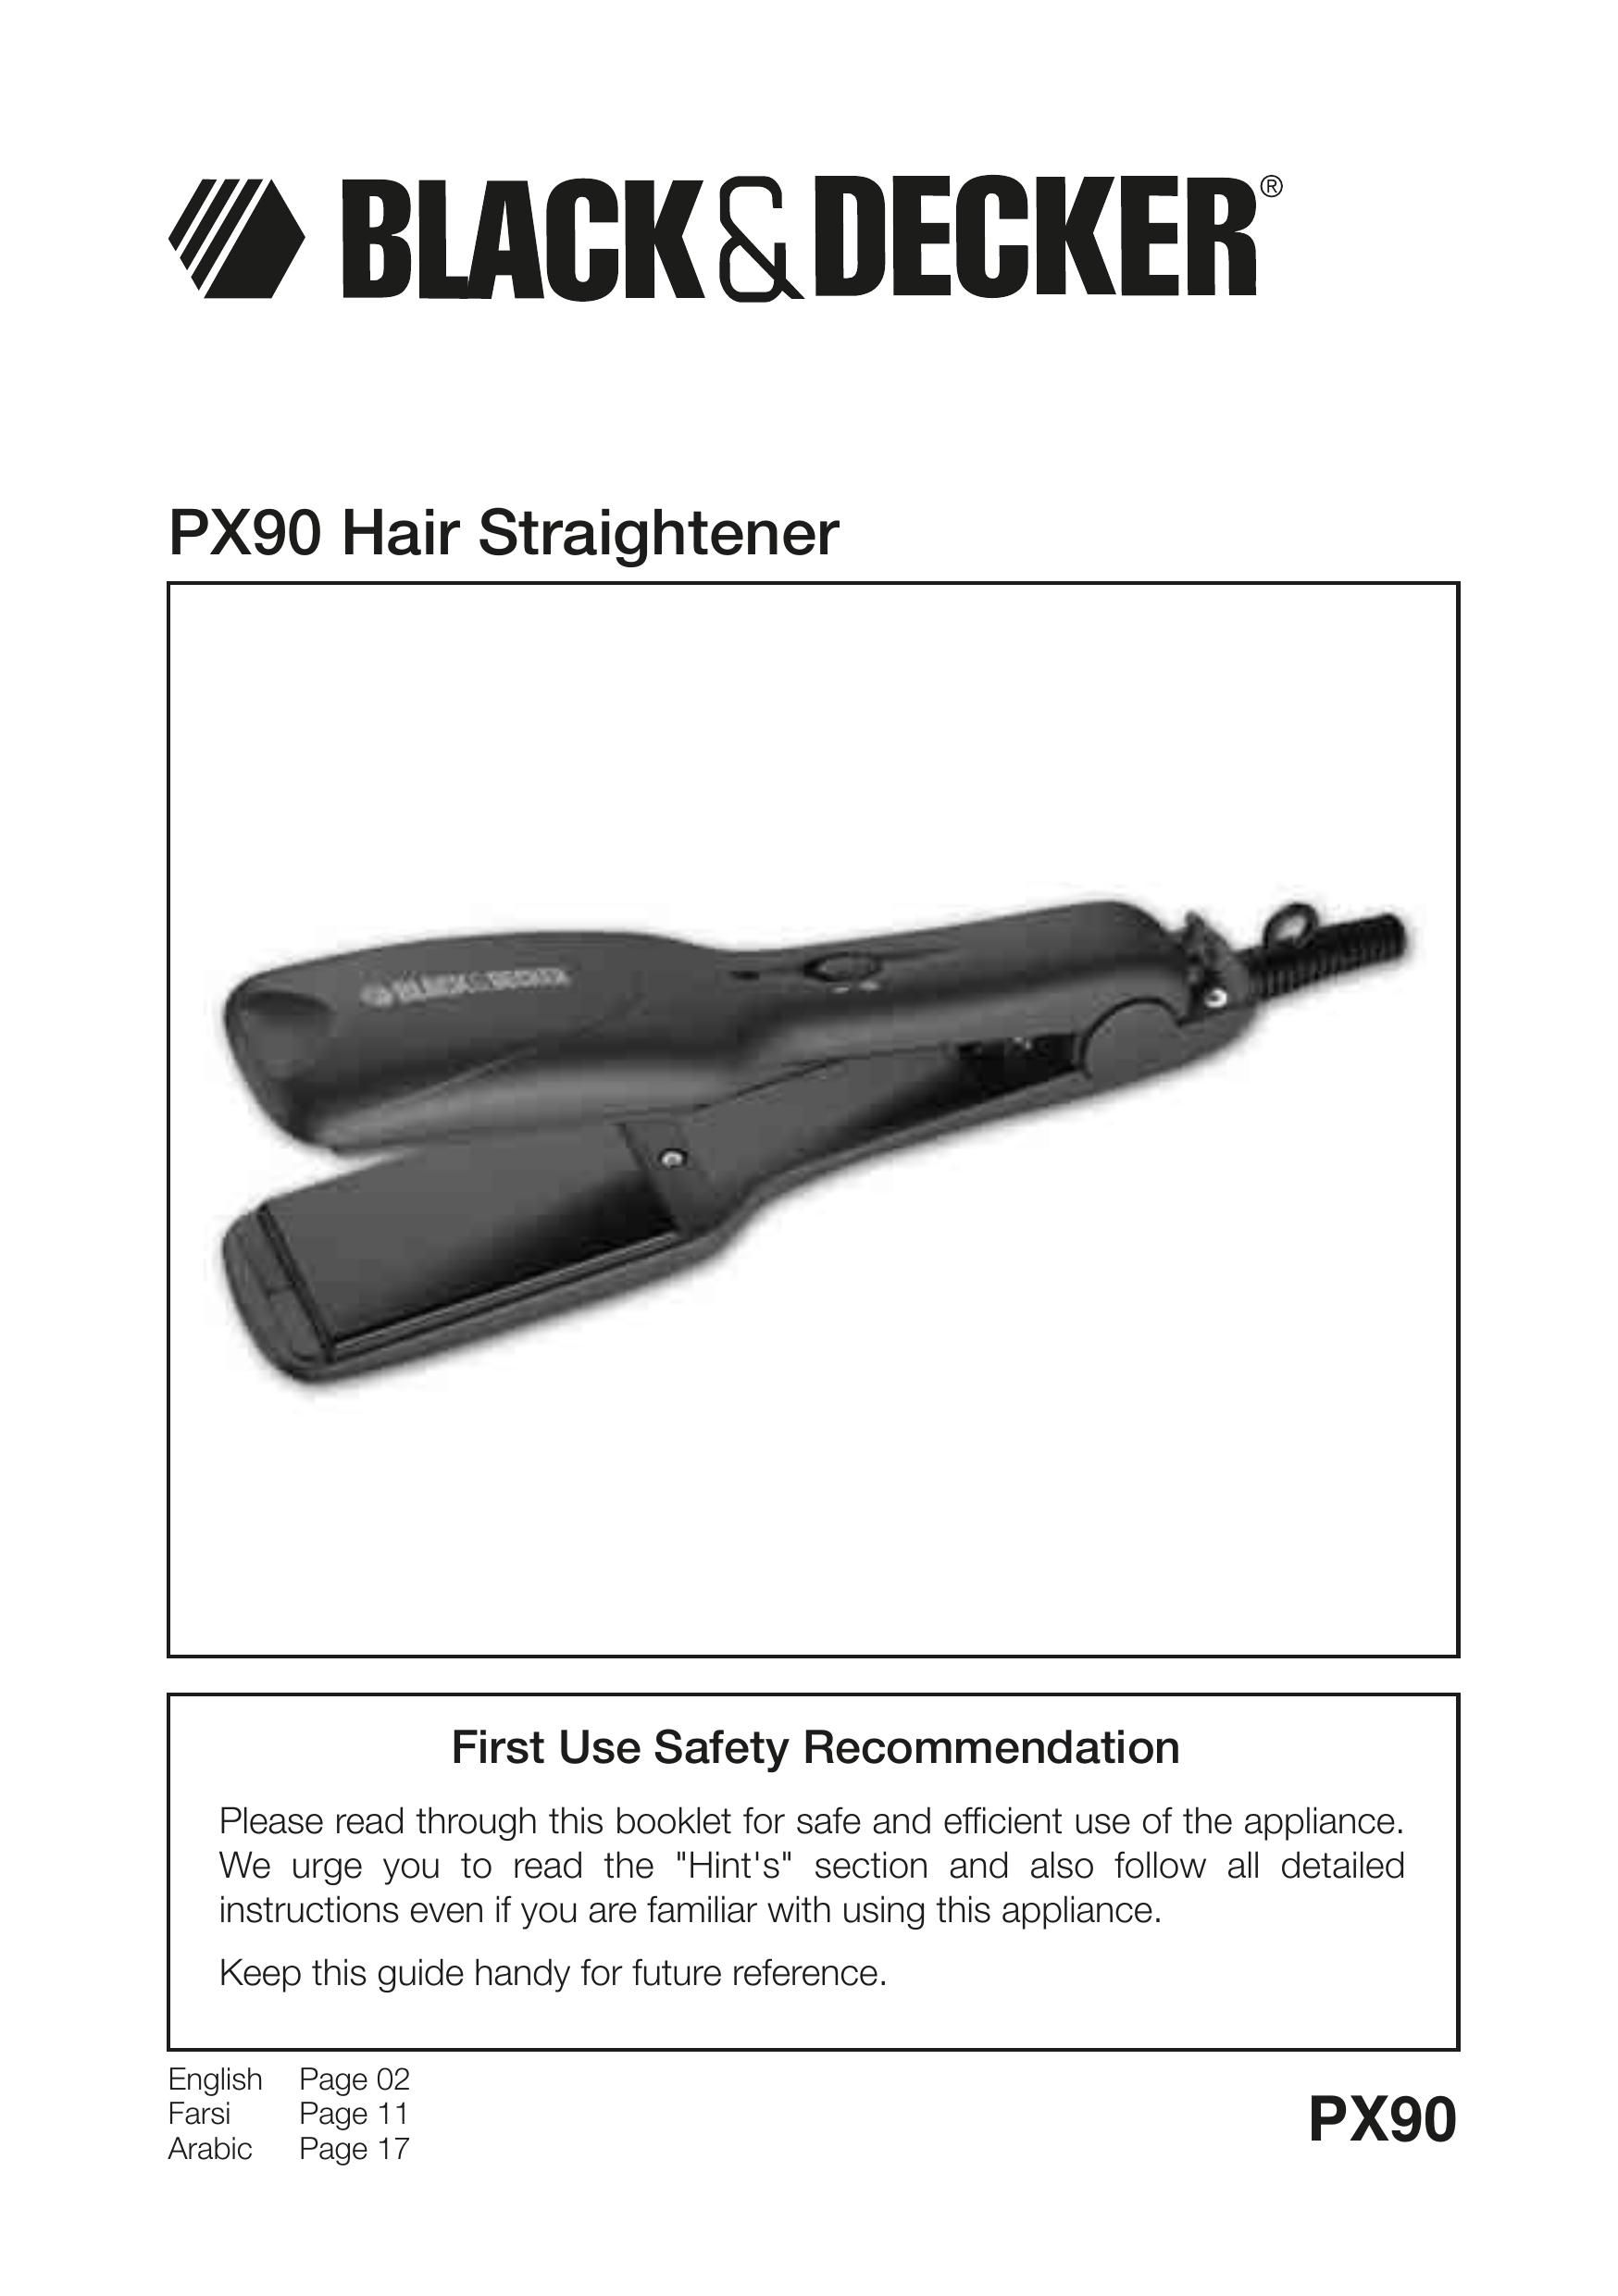 Black & Decker PX90 Hair Care Product User Manual